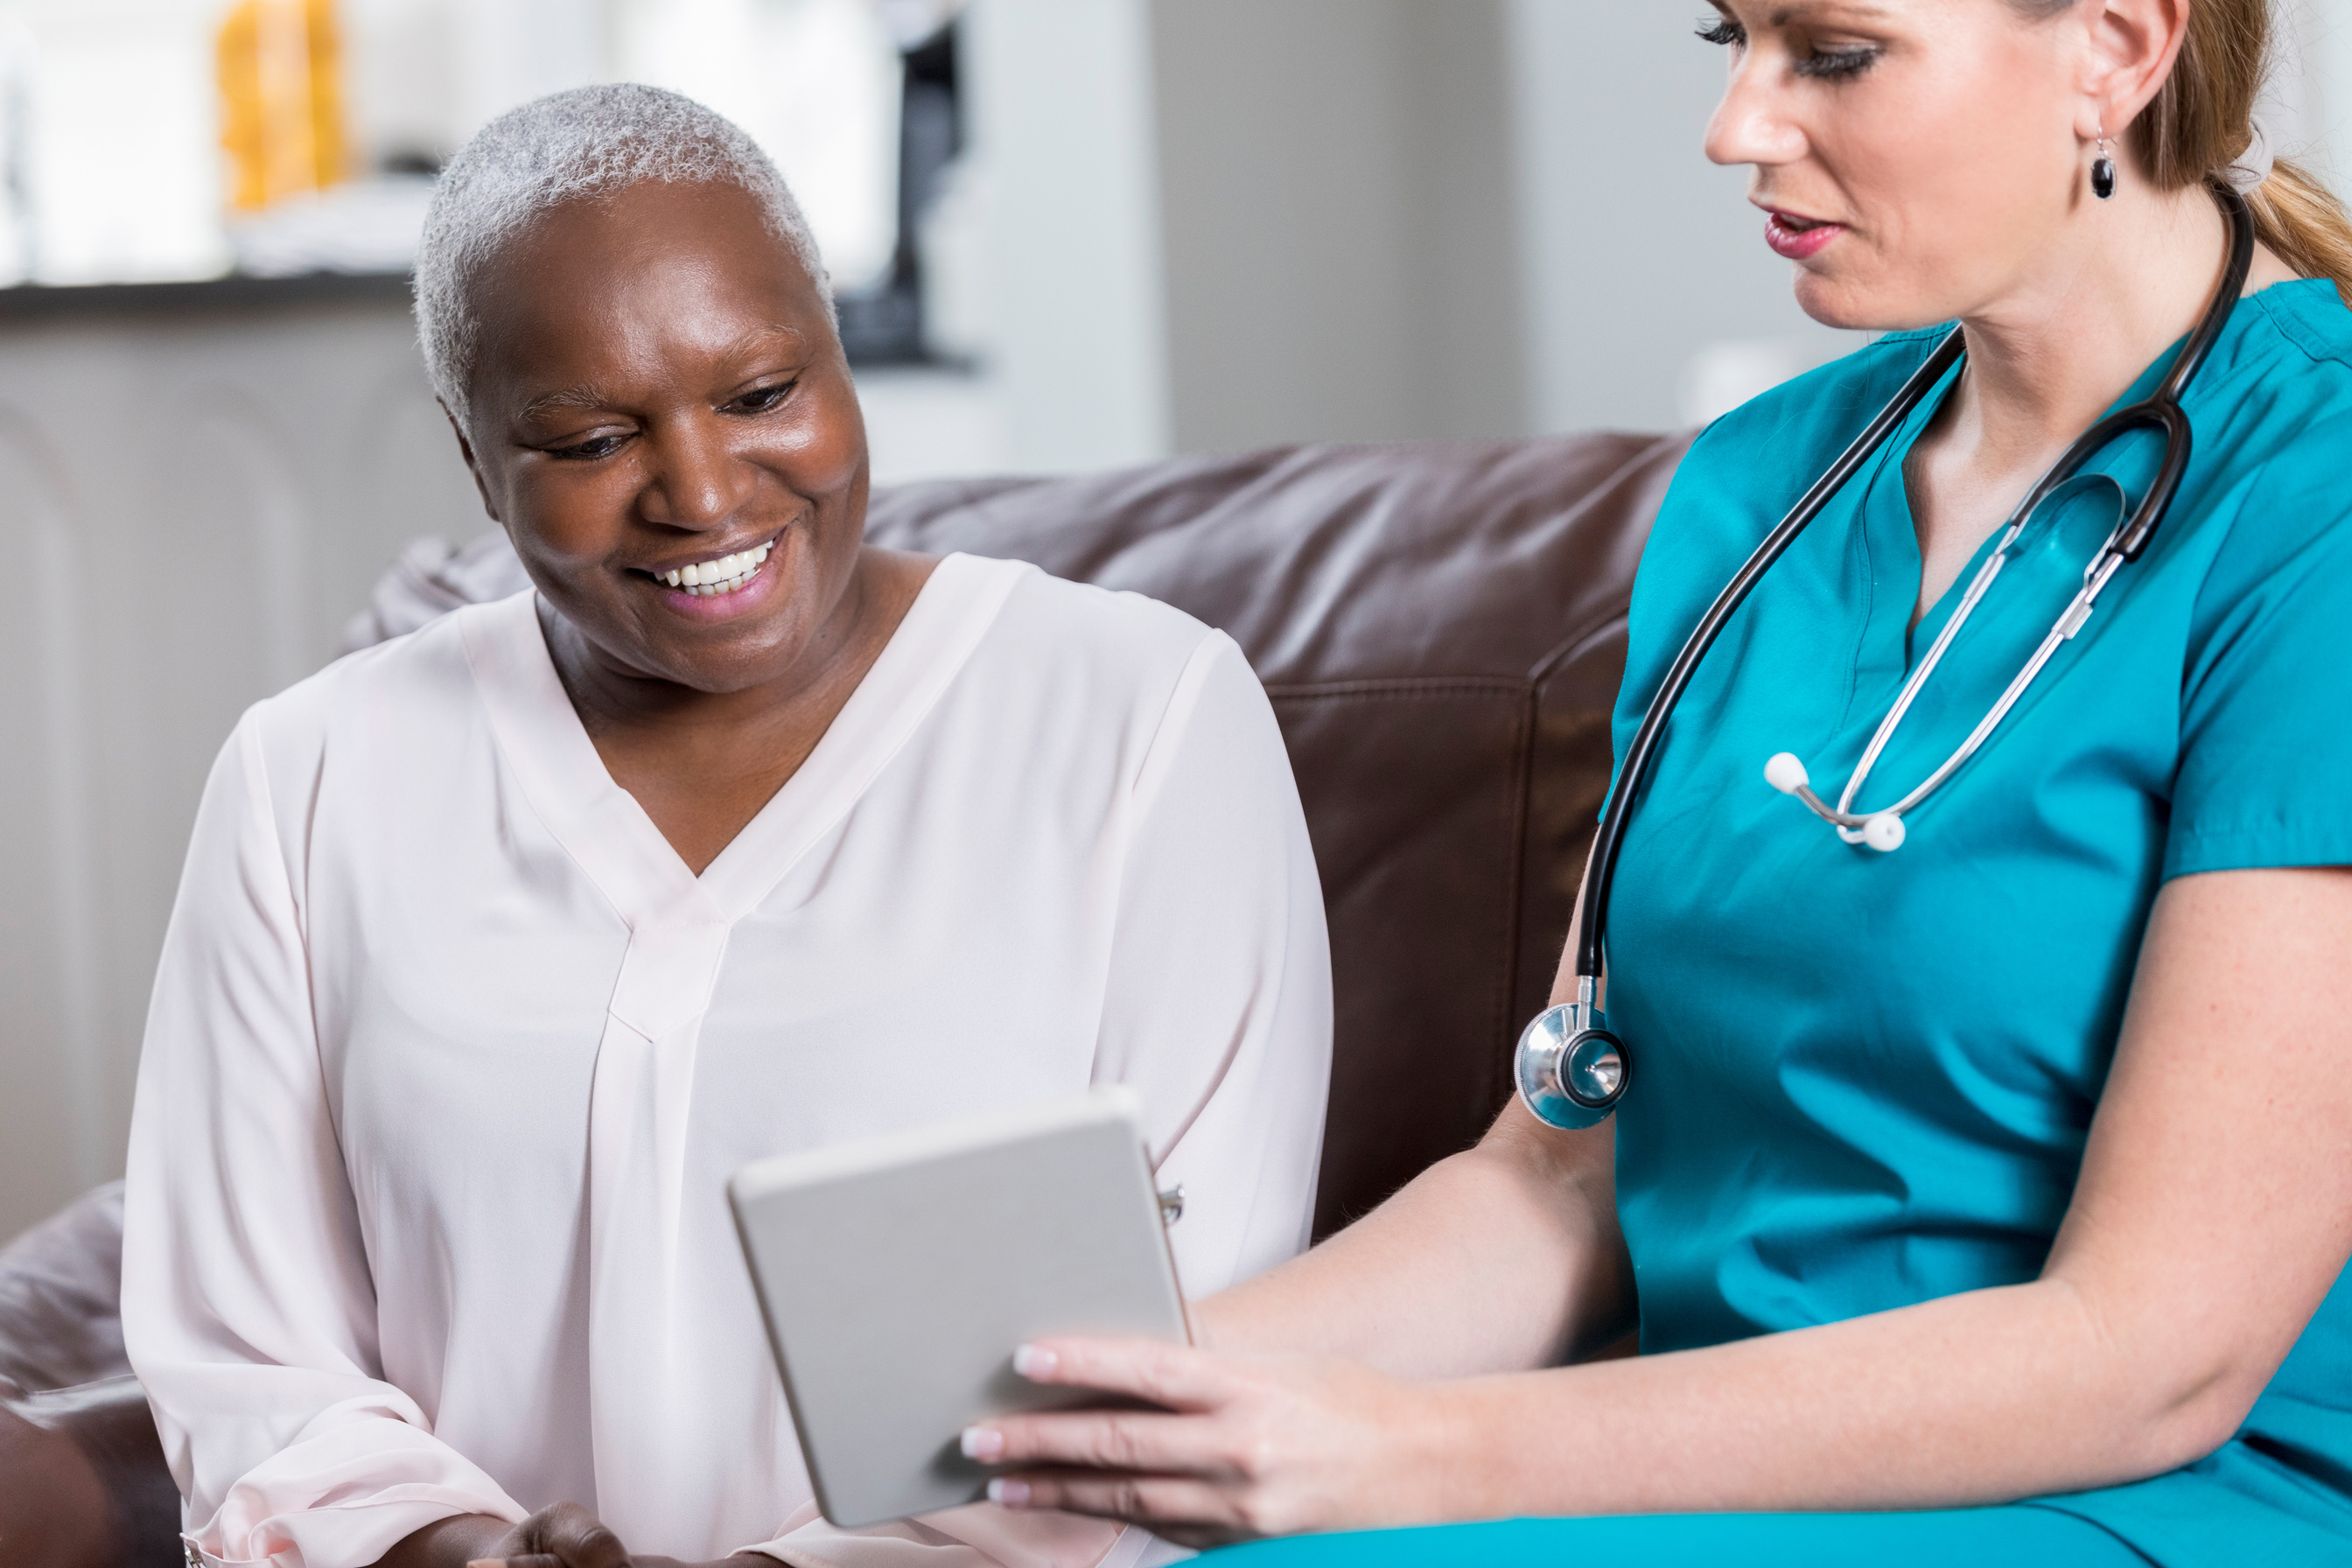 Home healthcare nurse reviews information with patient